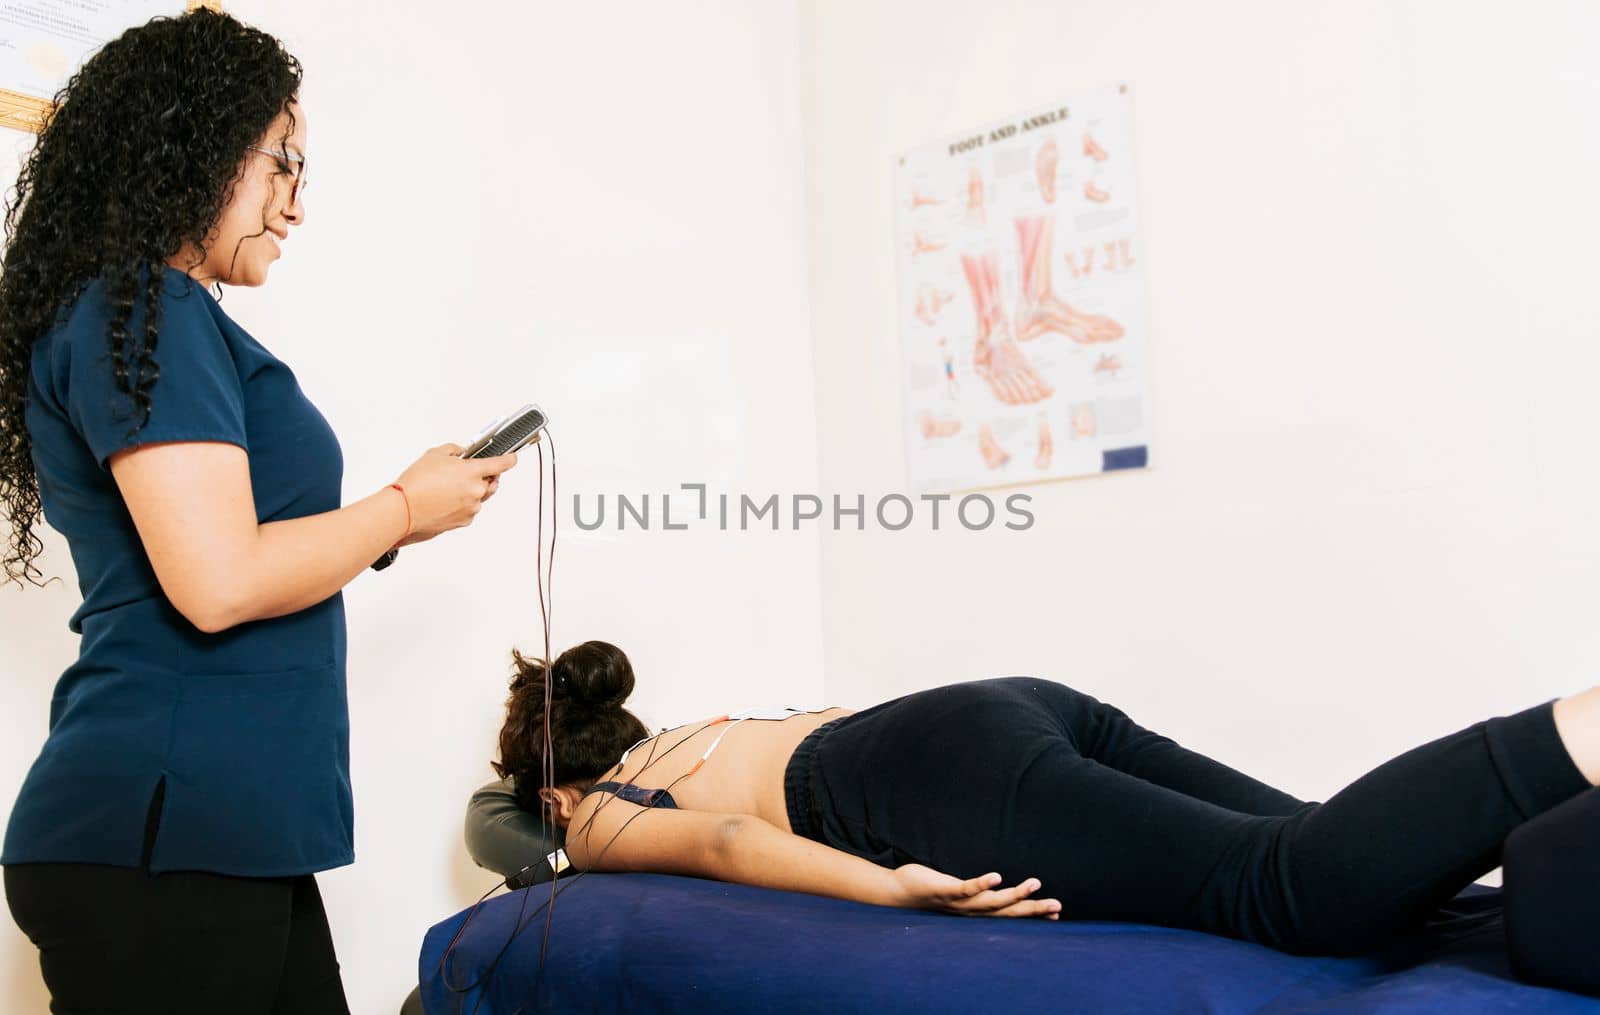 Professional physiotherapist electrostimulating a lying patient. Physiotherapist electrostimulating a patient. Lower back therapy with electrode pads. Electrode treatment to patient lying down by isaiphoto